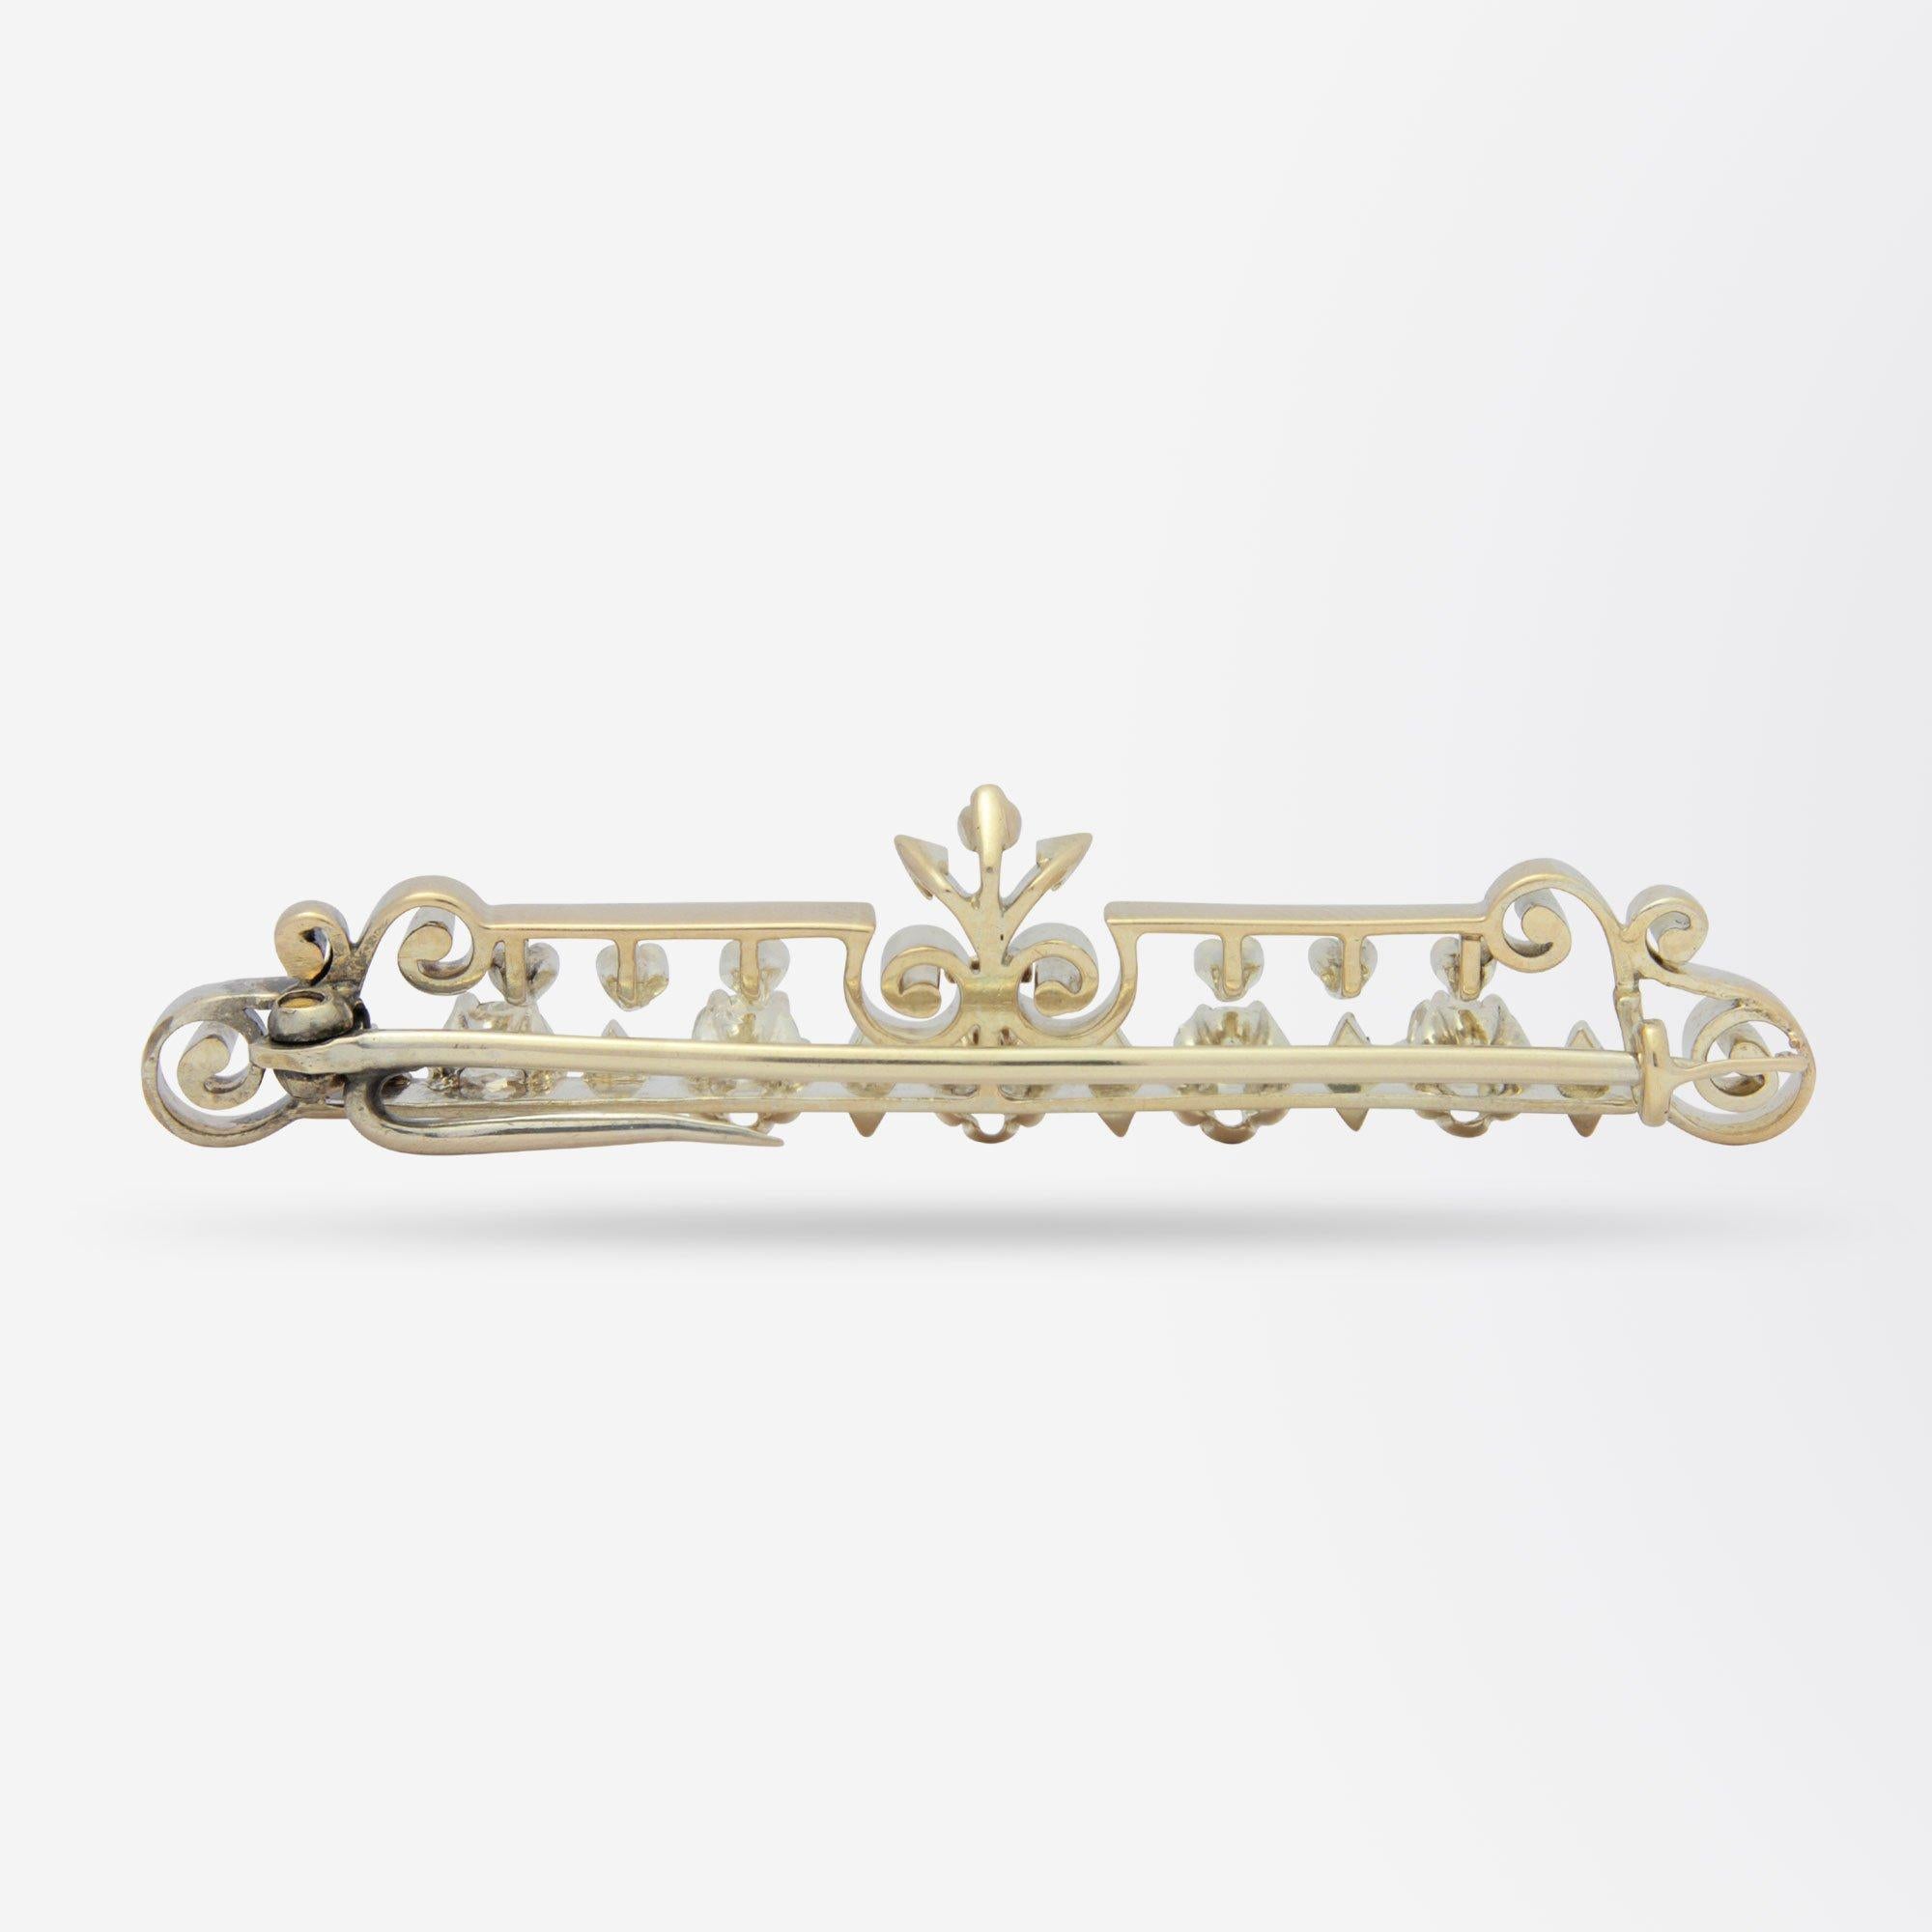 An exquisite handmade yellow gold and diamond bar brooch set with five Old Mine Cut Diamonds. The symmetrical pin has been handcrafted in 18 karat yellow gold and set horizontally with five Old Mine Cut Diamonds of H/I colour and SI clarity